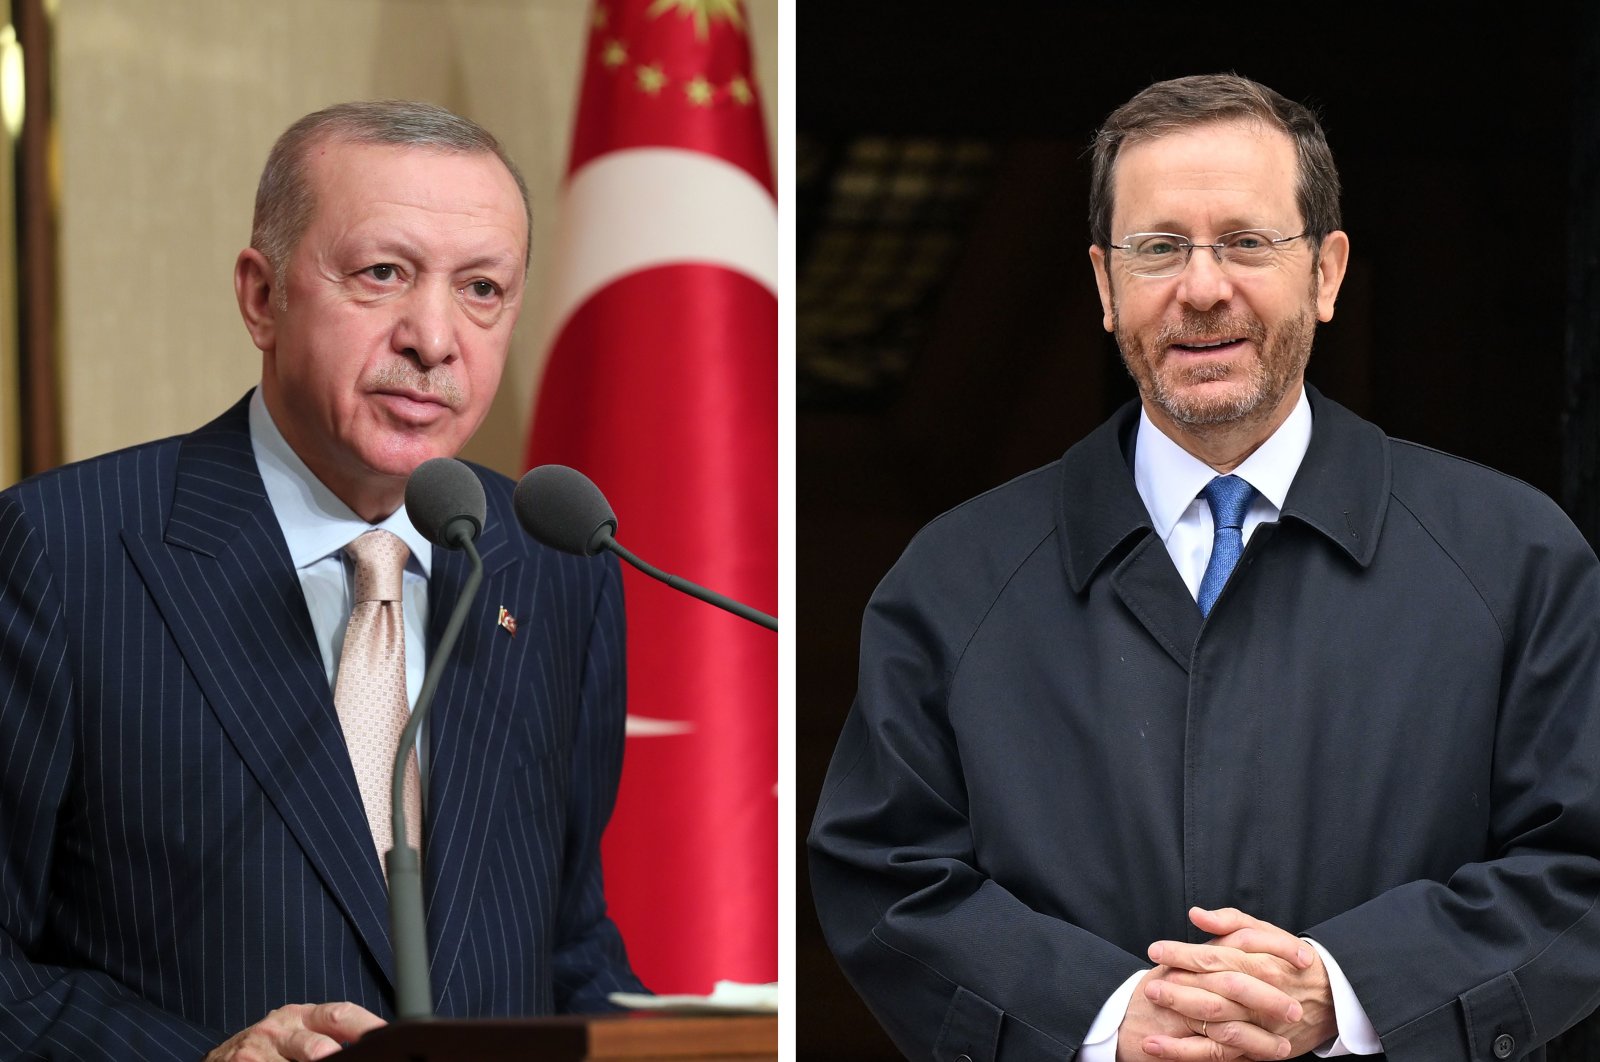 This photo combination shows President Recep Tayyip Erdoğan (L) speaking during an event in Ankara, Turkey on March 8, 2022, and his Israeli counterpart Isaac Herzog posing while meeting with the Greek Cypriot leader Nicos Anastasiades (not pictured) in Lefkoşa (Nicosia), Cyprus, March 2, 2022. (Photos by AA and EPA)